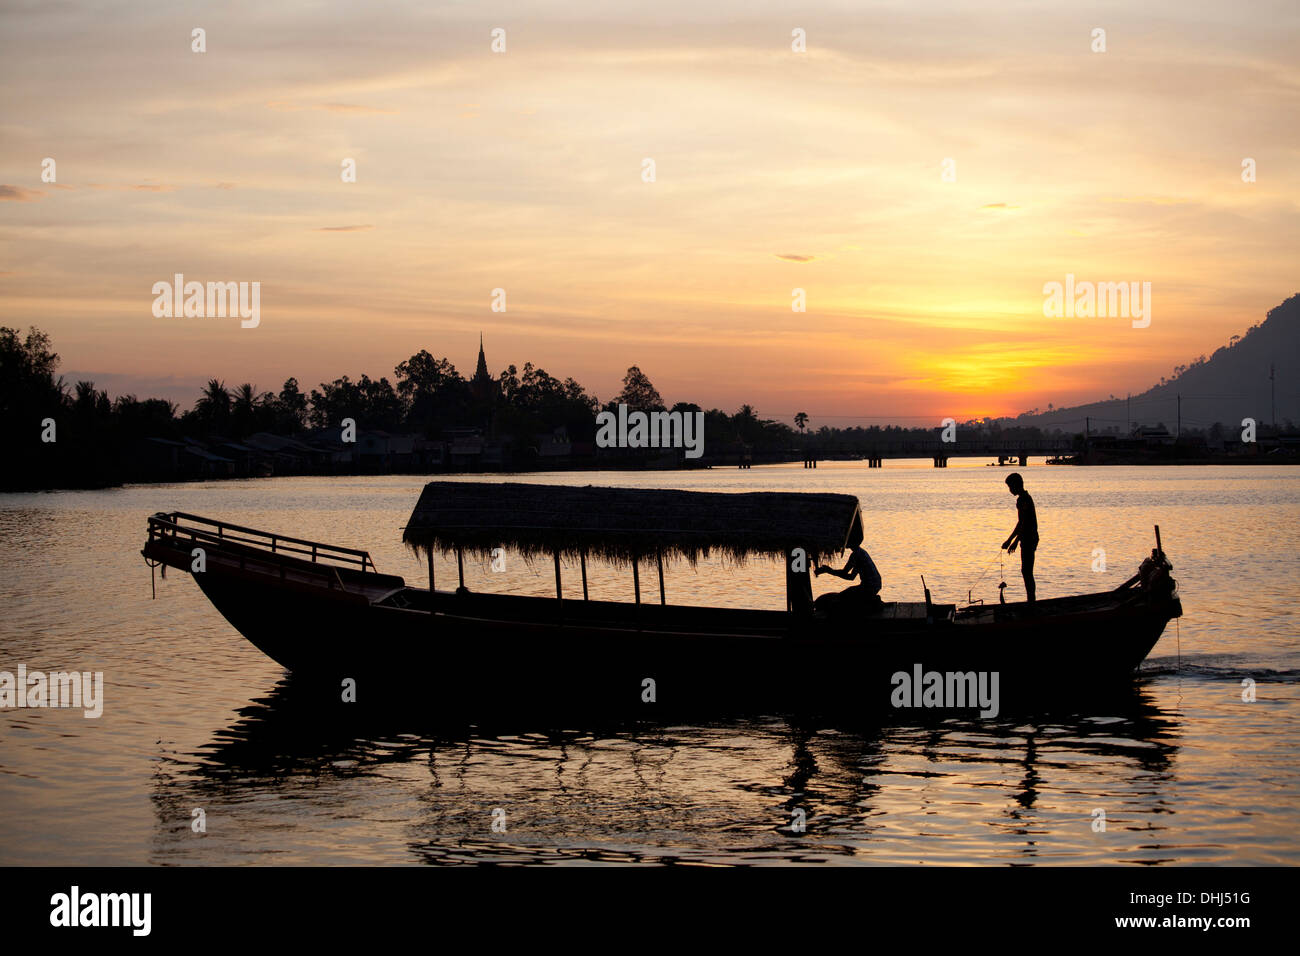 Fishing boat at sunset in Kampot at the Prek Thom River, Kampot province, Cambodia, Asia Stock Photo